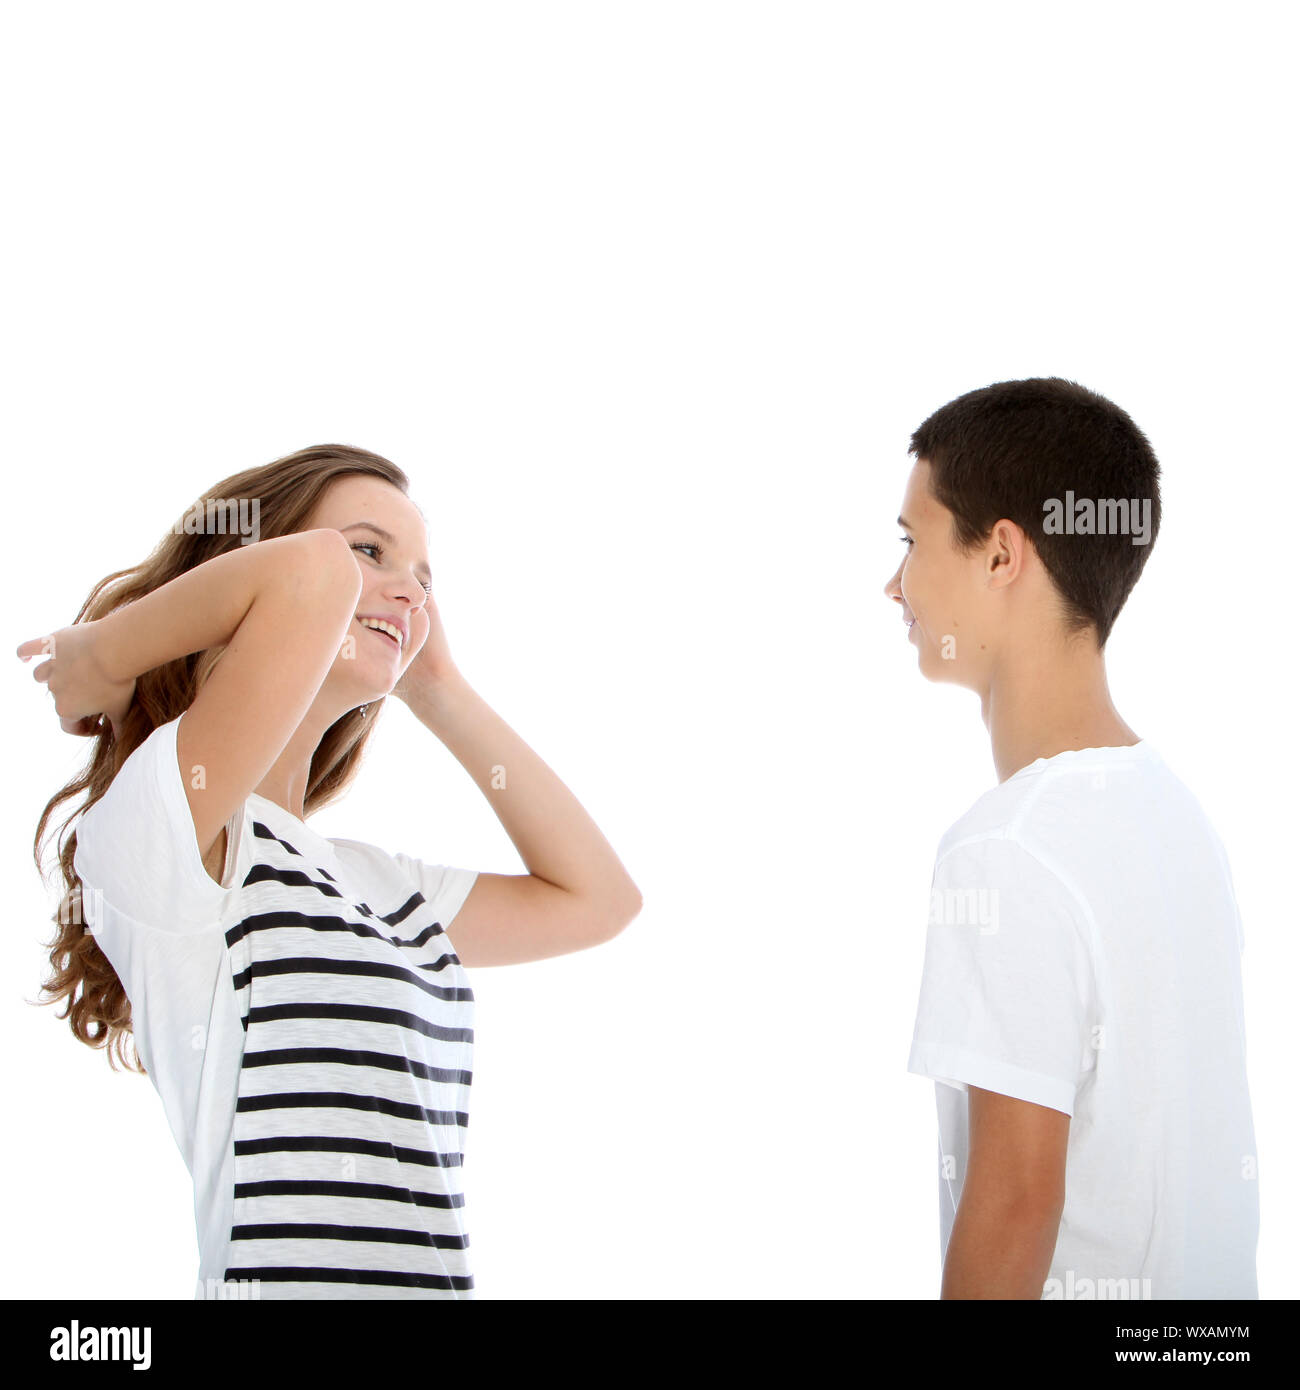 Young teenage couple talking with the girl flicking her hair and laughing flirtaceously isolated on white Stock Photo